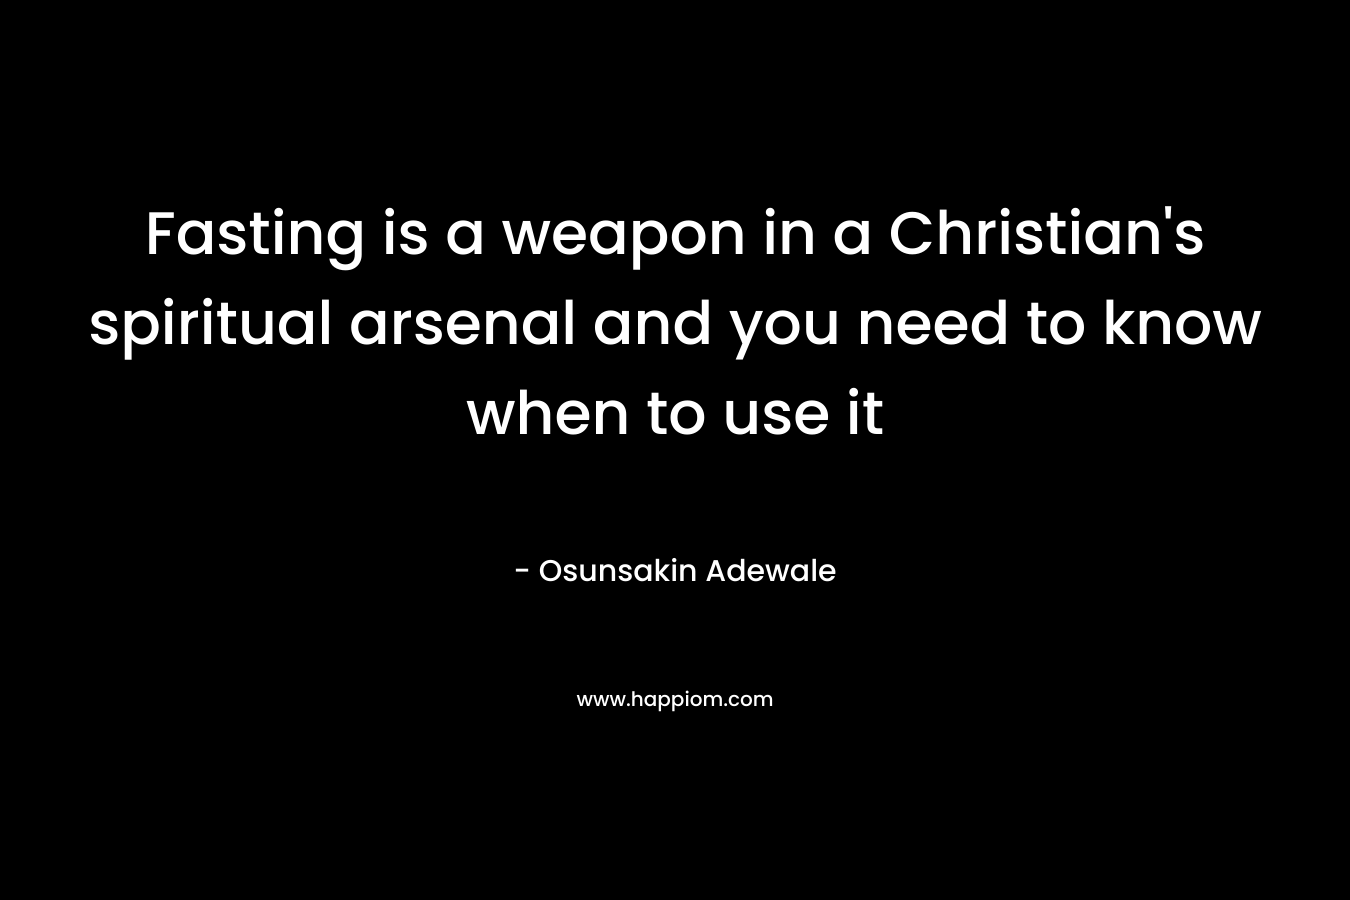 Fasting is a weapon in a Christian’s spiritual arsenal and you need to know when to use it – Osunsakin Adewale